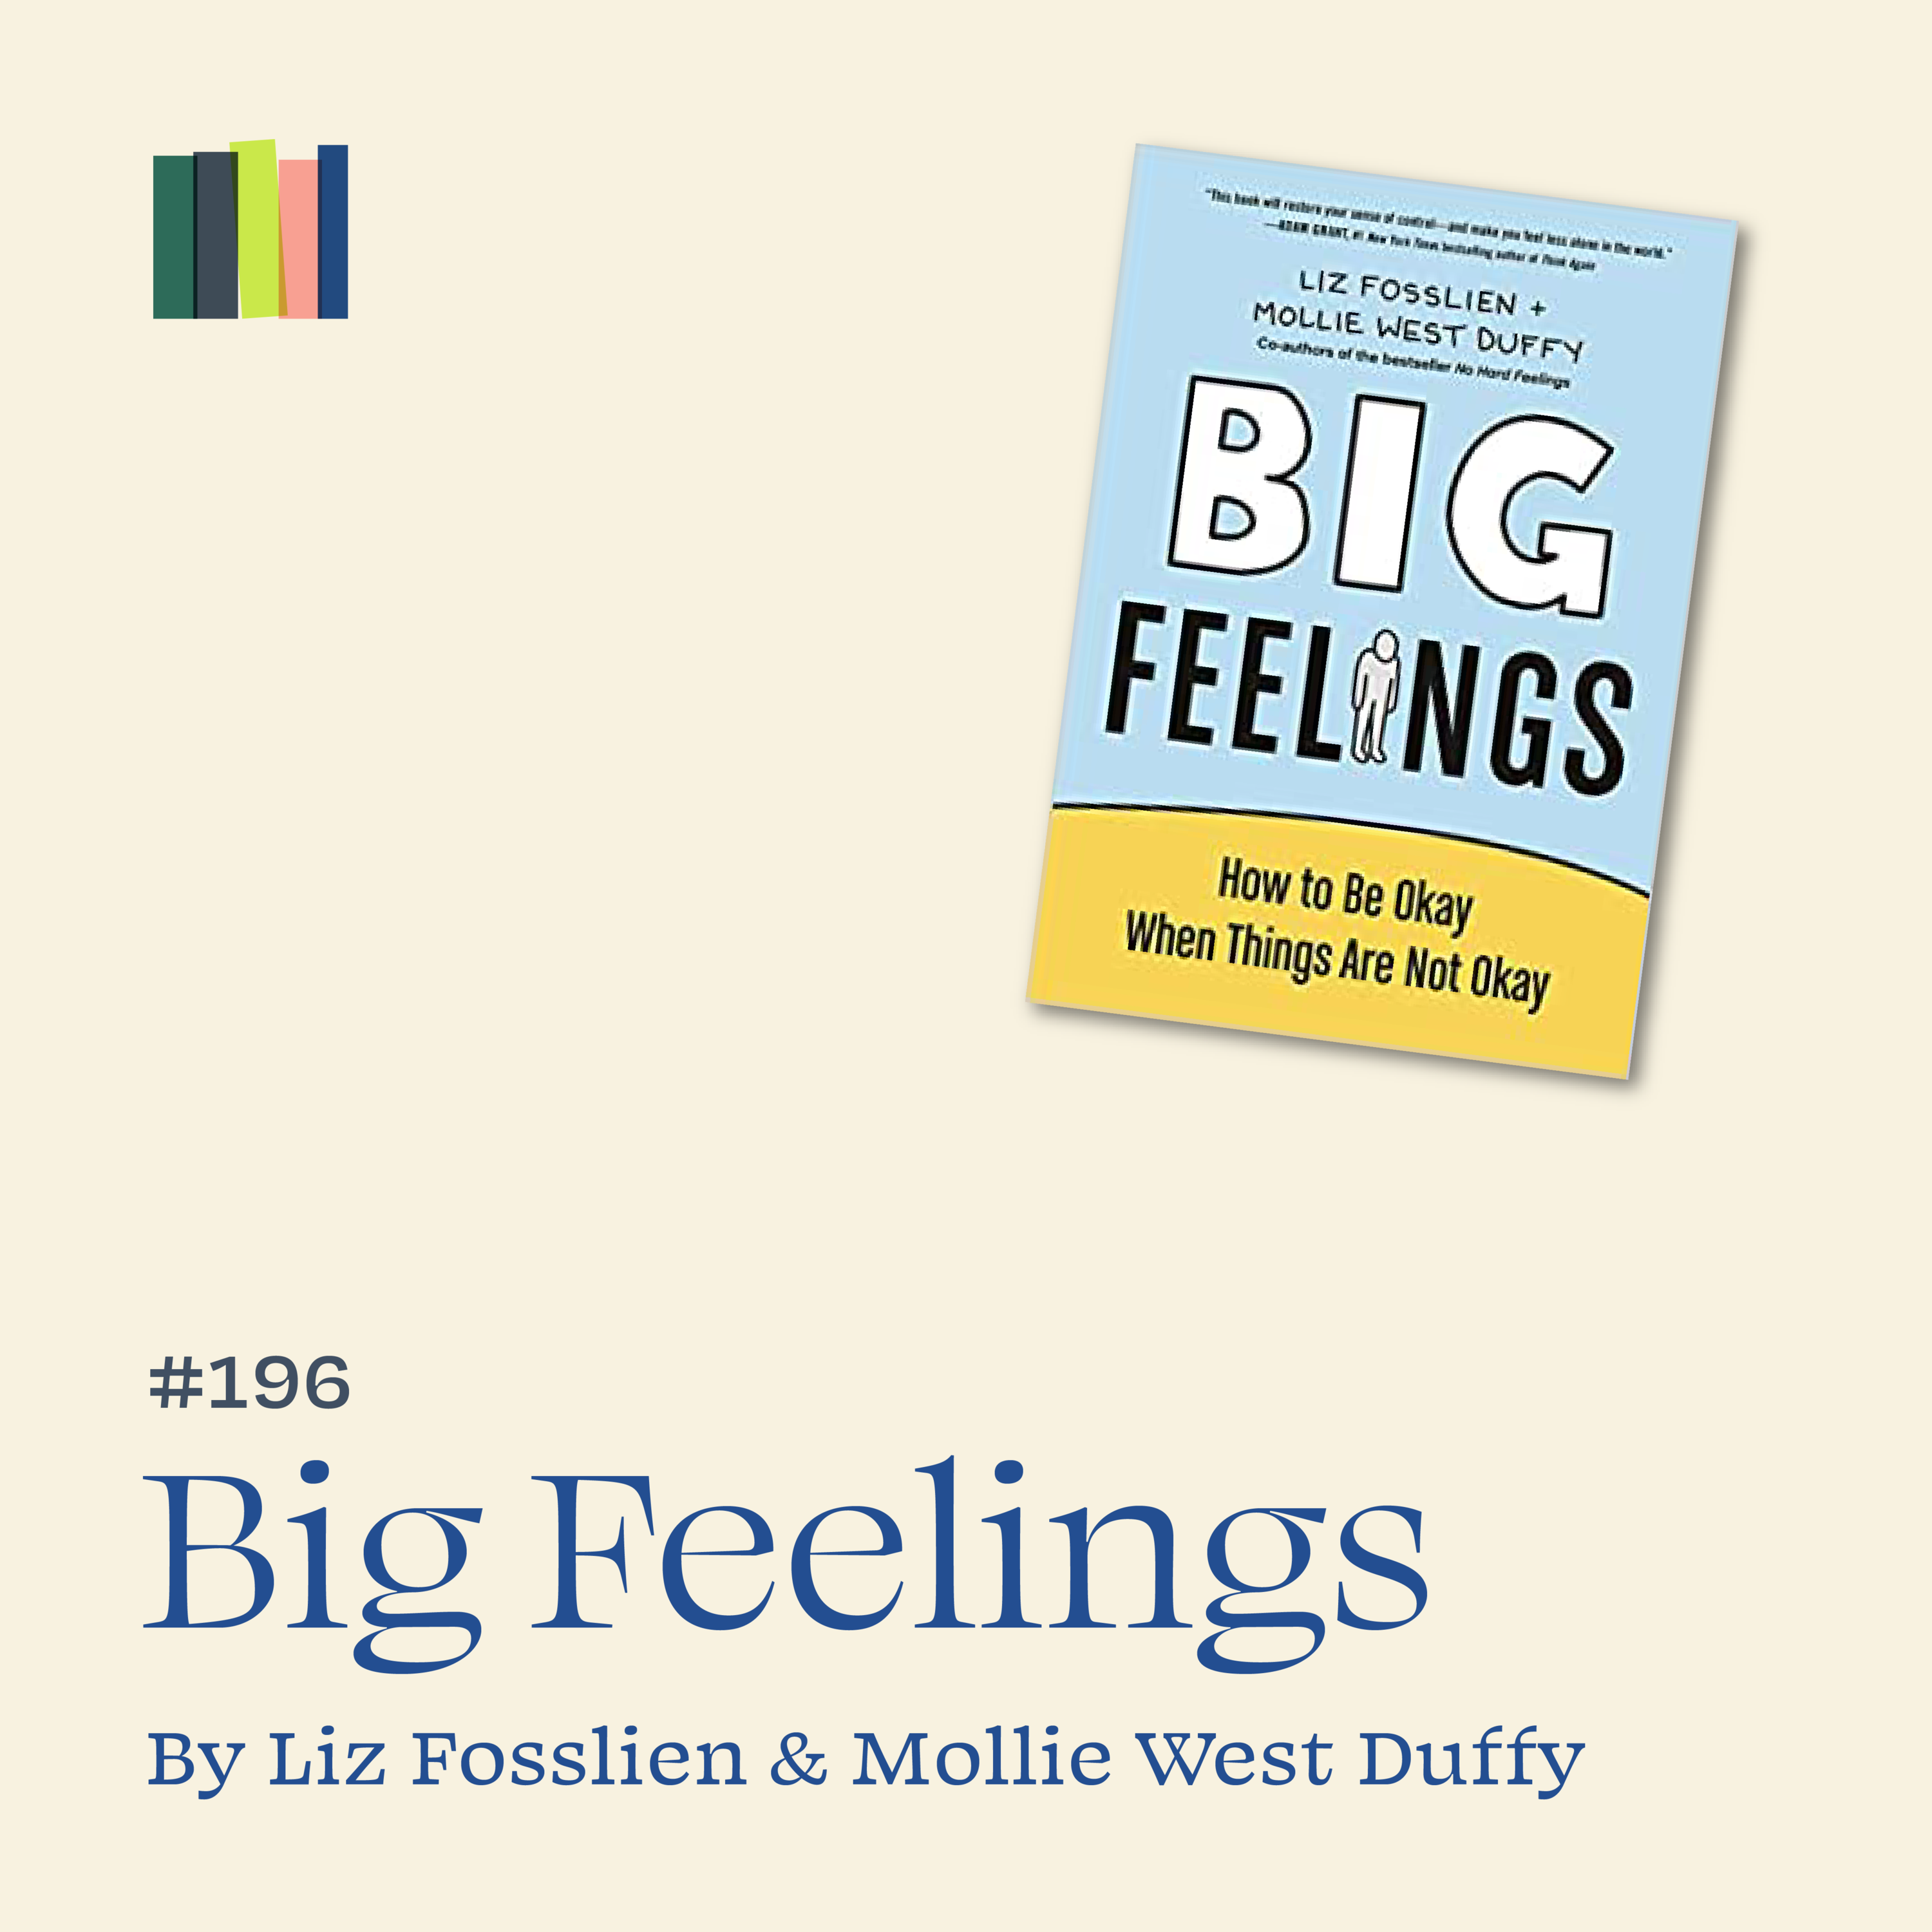 Big Feelings by Liz Fosslien and Mollie West Duffy: how to be a human